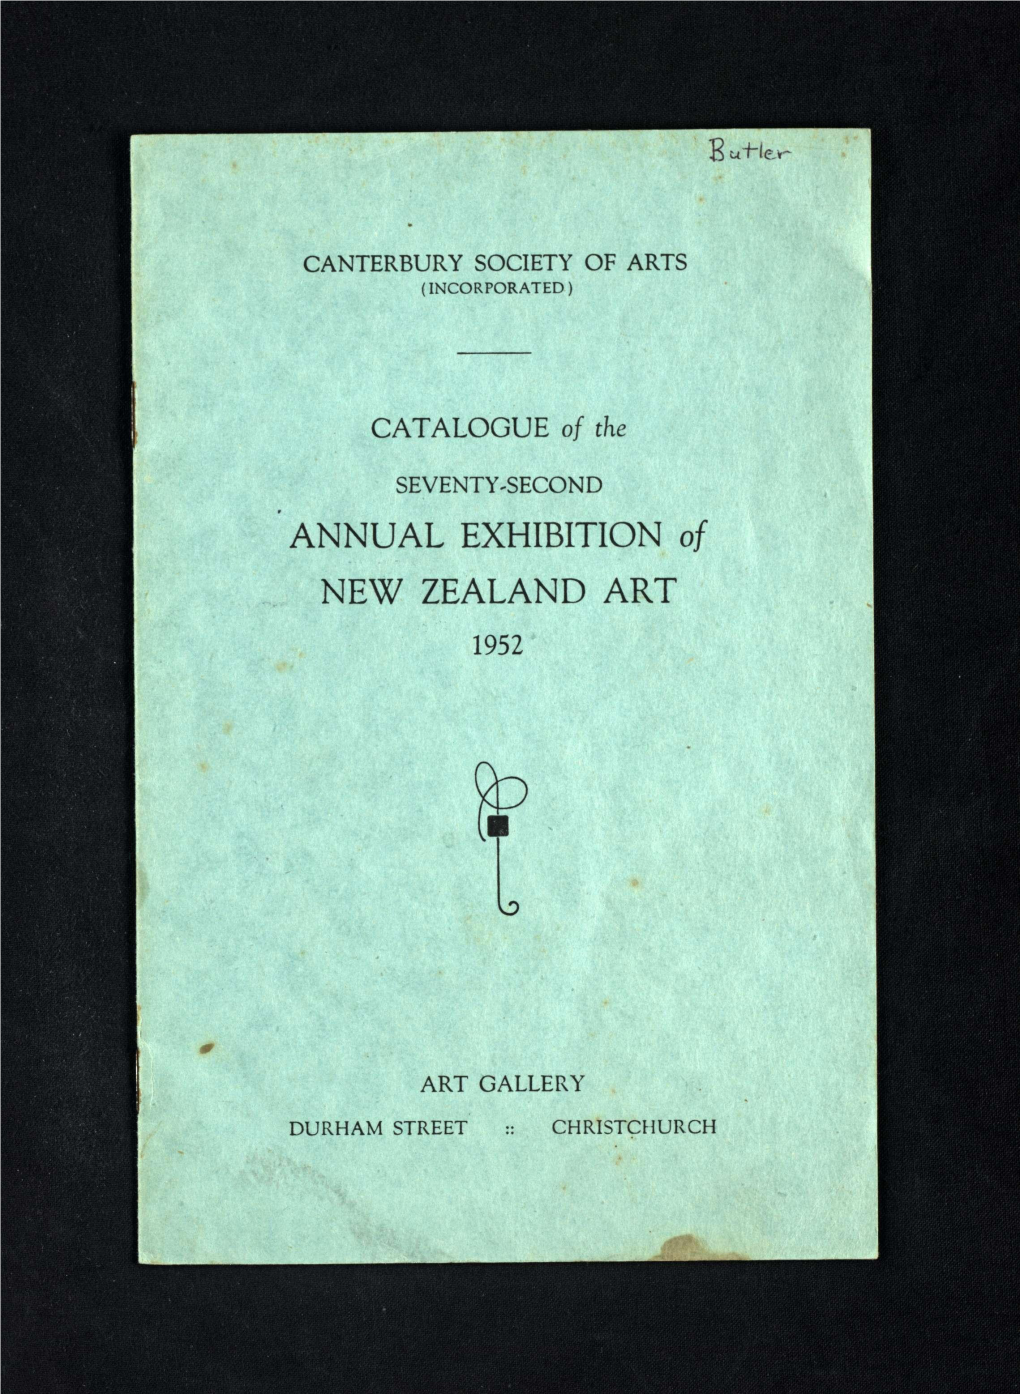 ' ANNUAL EXHIBITION of NEW ZEALAND ART 1952